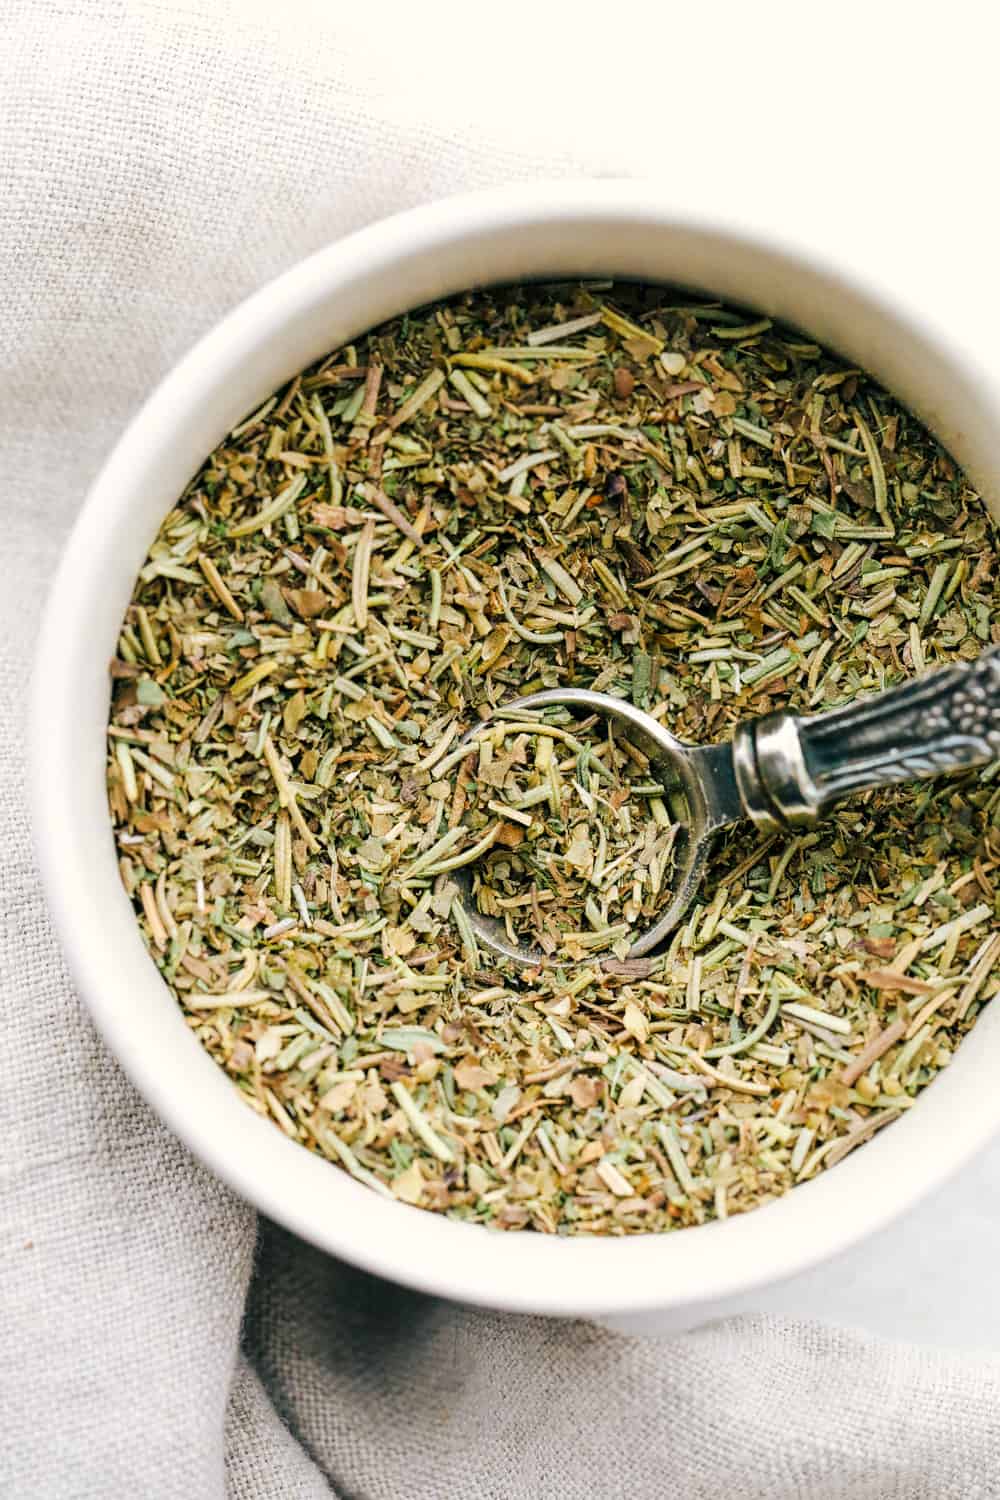 What Spices Go Well With Thyme